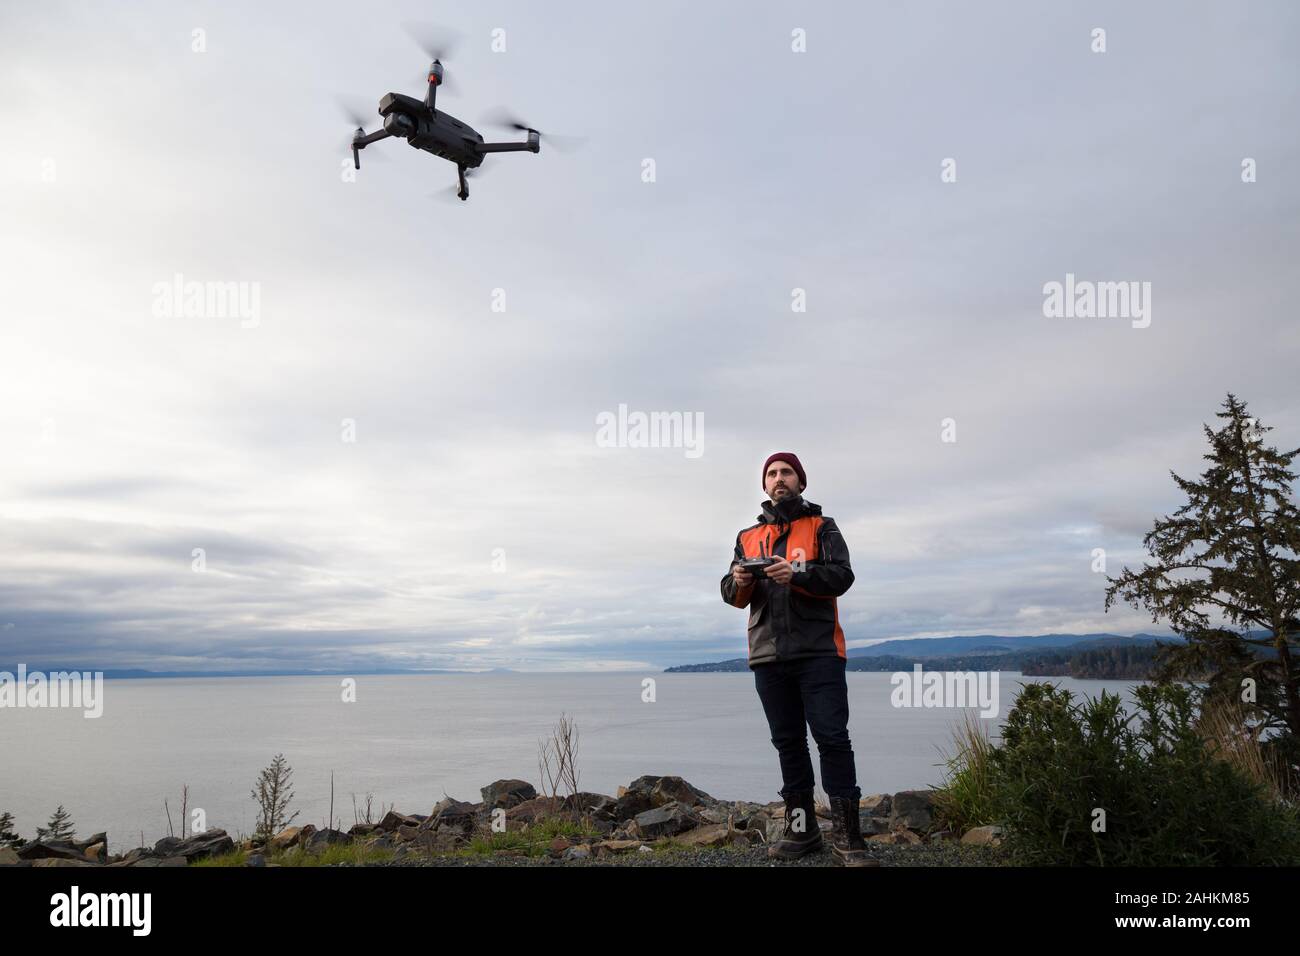 A professional drone pilot flying a drone near the ocean. Stock Photo